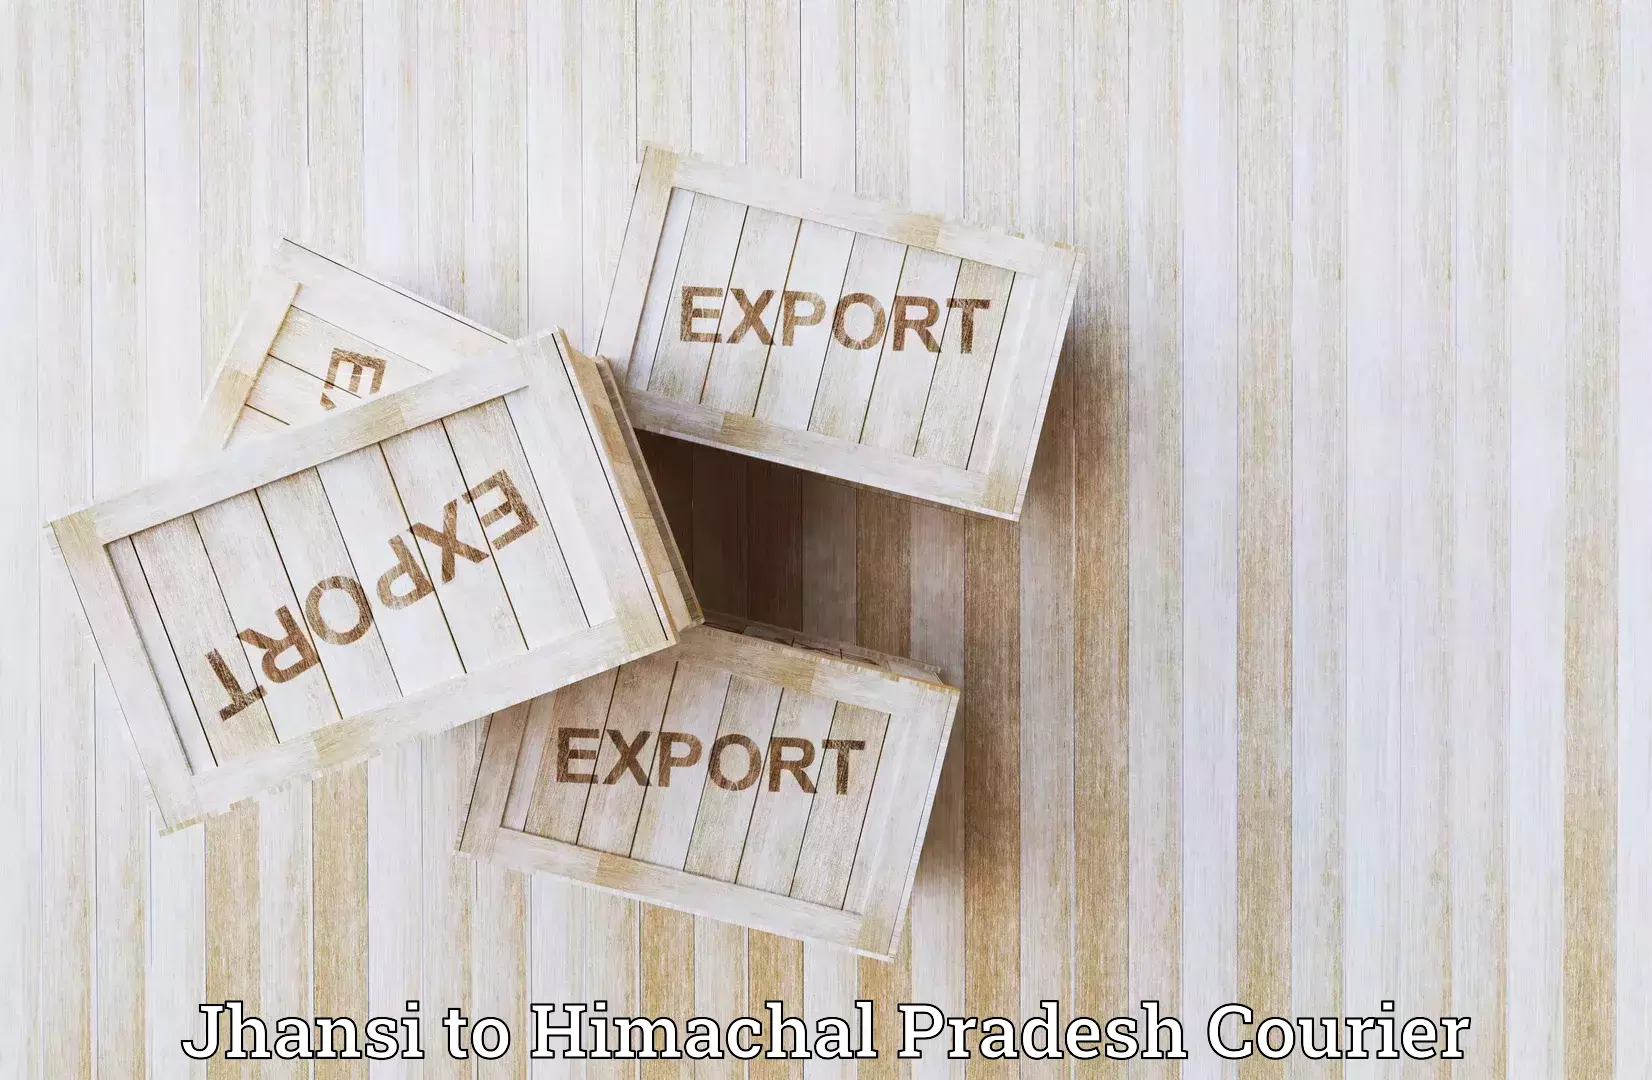 Courier dispatch services Jhansi to Bharari